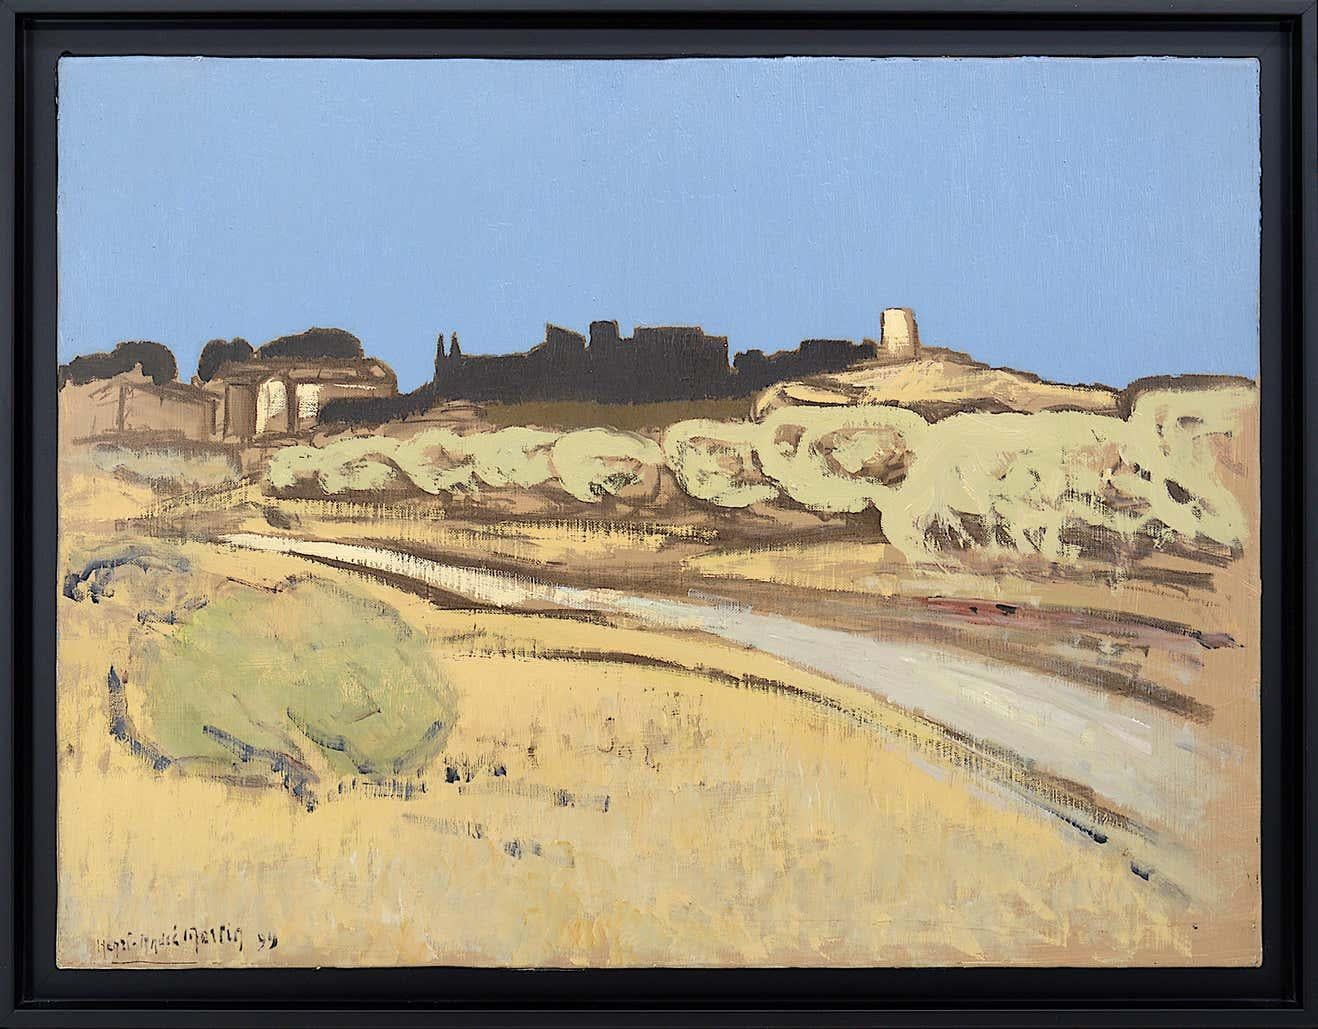 Oil on canvas by Henri-André Martin (1918-2004), France, 1999. Road in Eygalieres, Alpilles, Provence. With frame: 52x67 cm - 20.5x26.4 inches. Without frame: 46x61cm - 18.1x24 inches. Format 12P. Signed and dated lower left "Henri-André Martin 99"